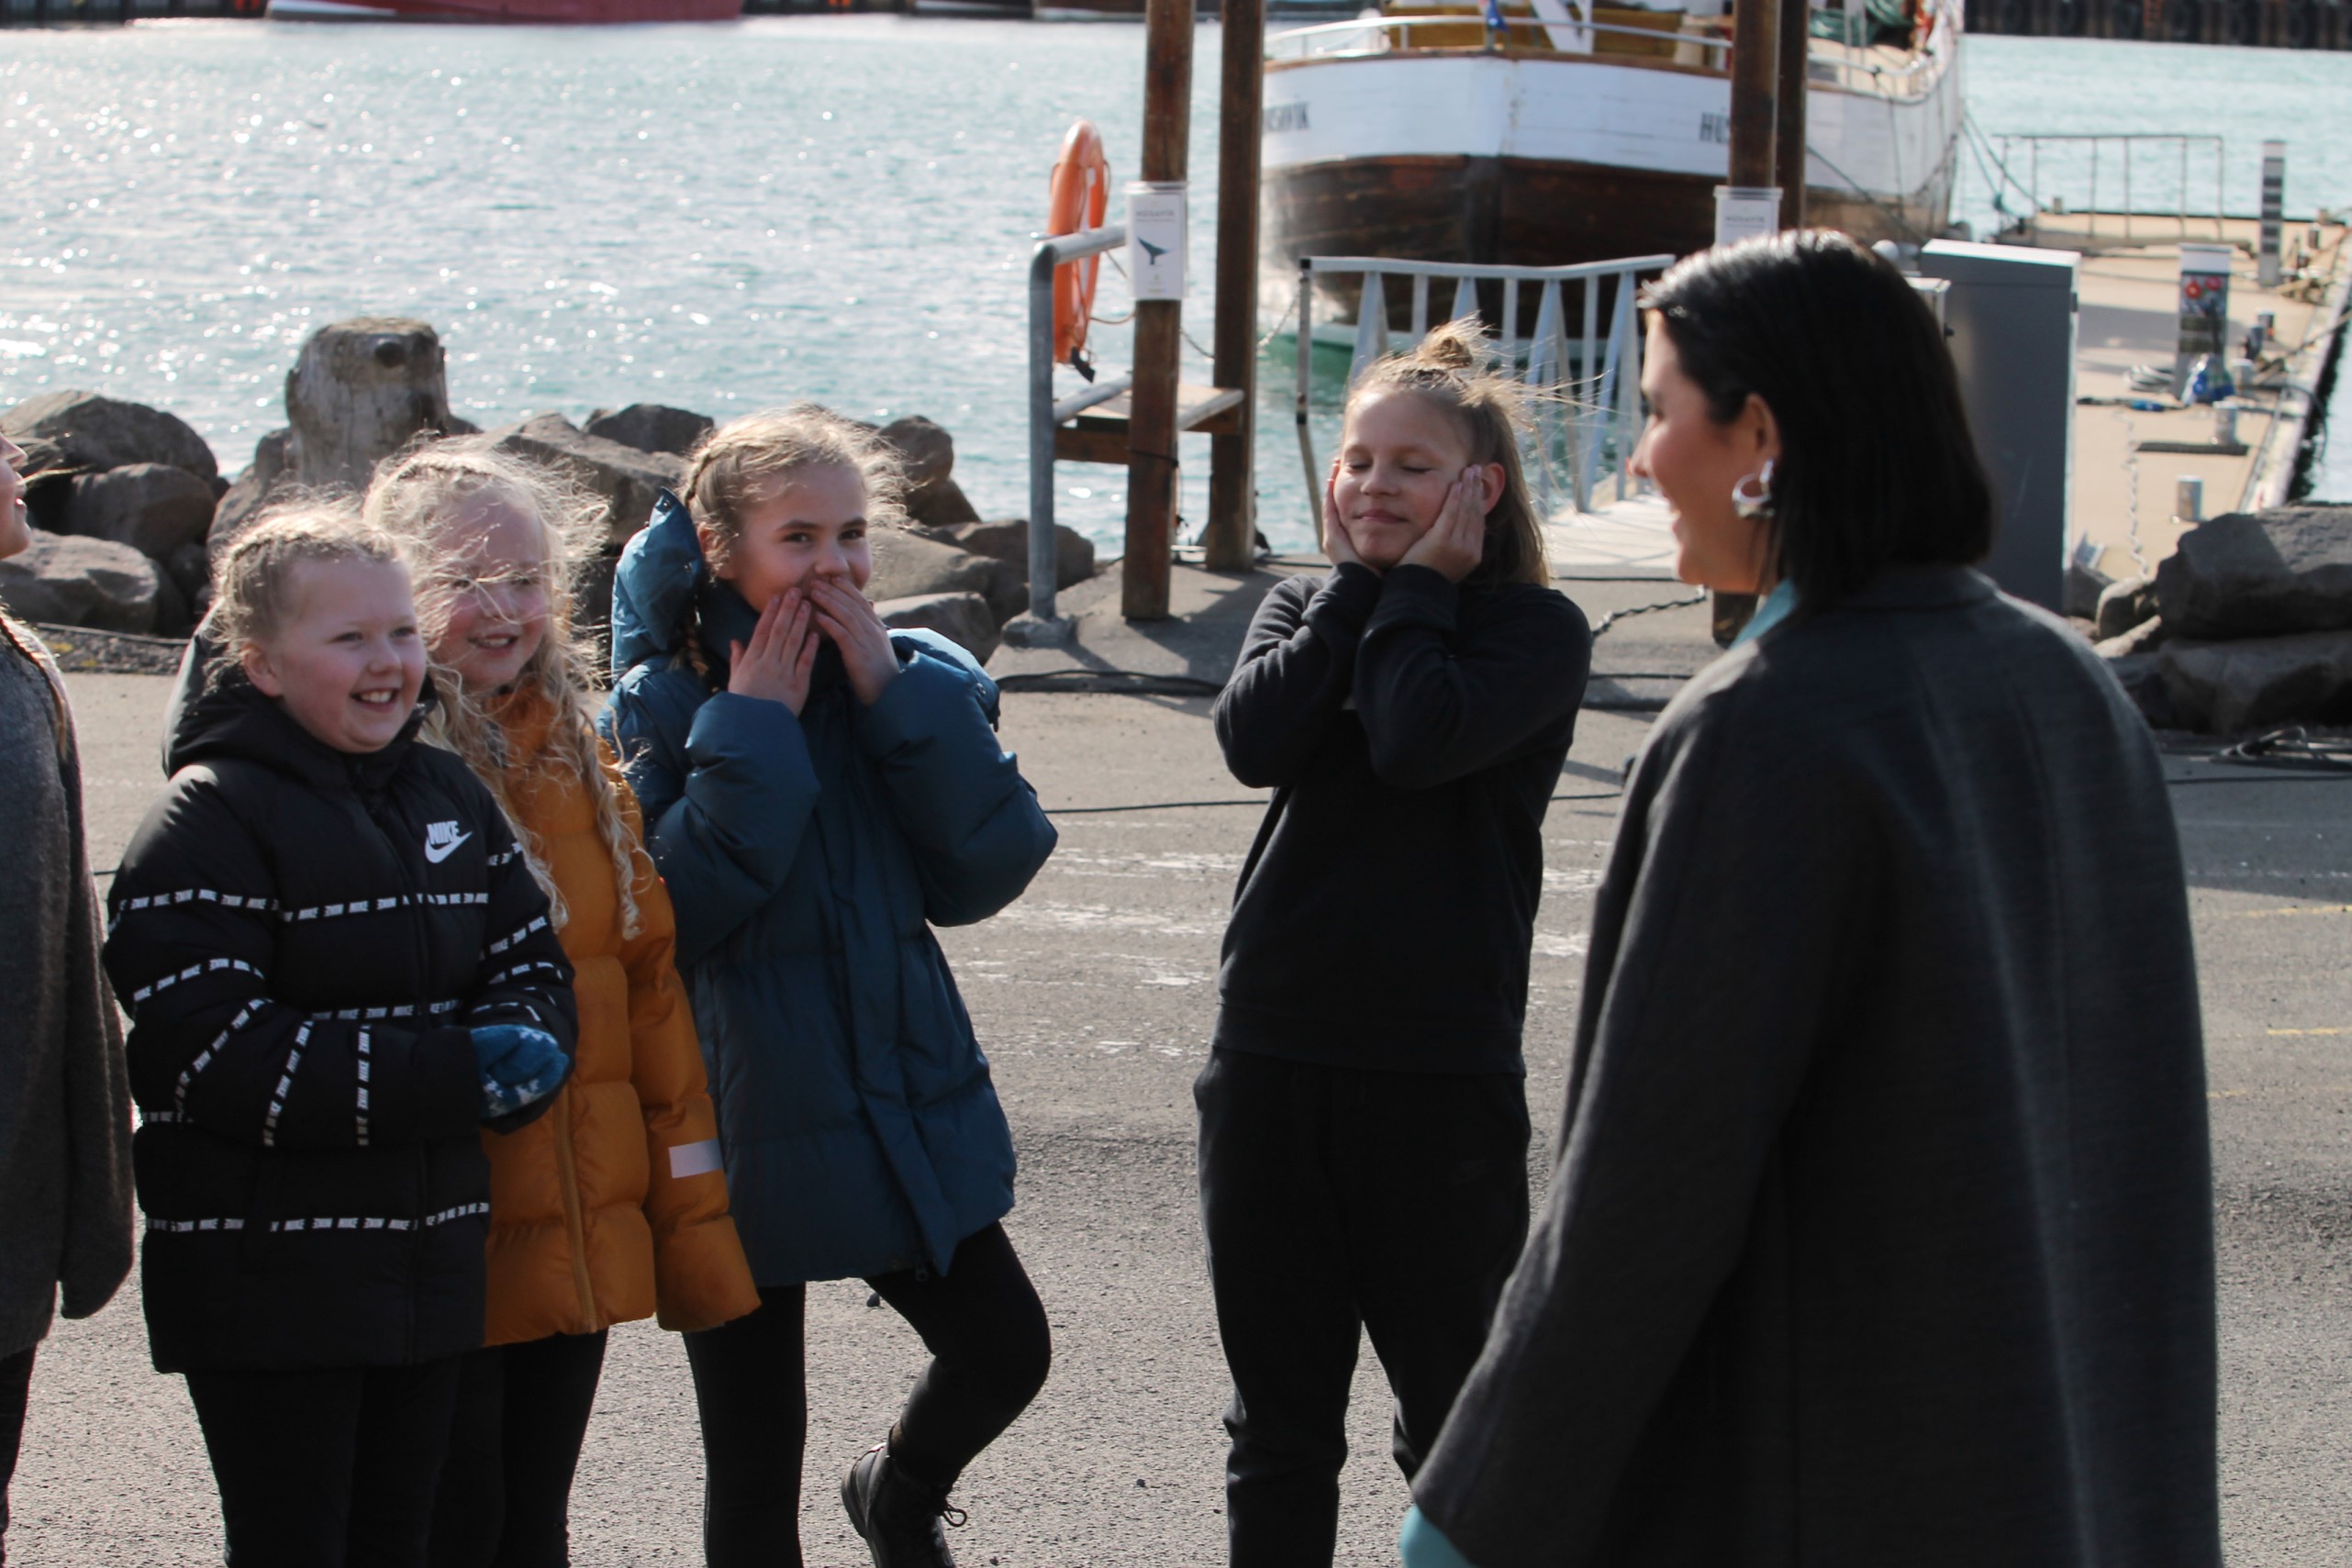 Molly Sandén standing with her back to the camera speaking to a group of young people in Husavik harbour